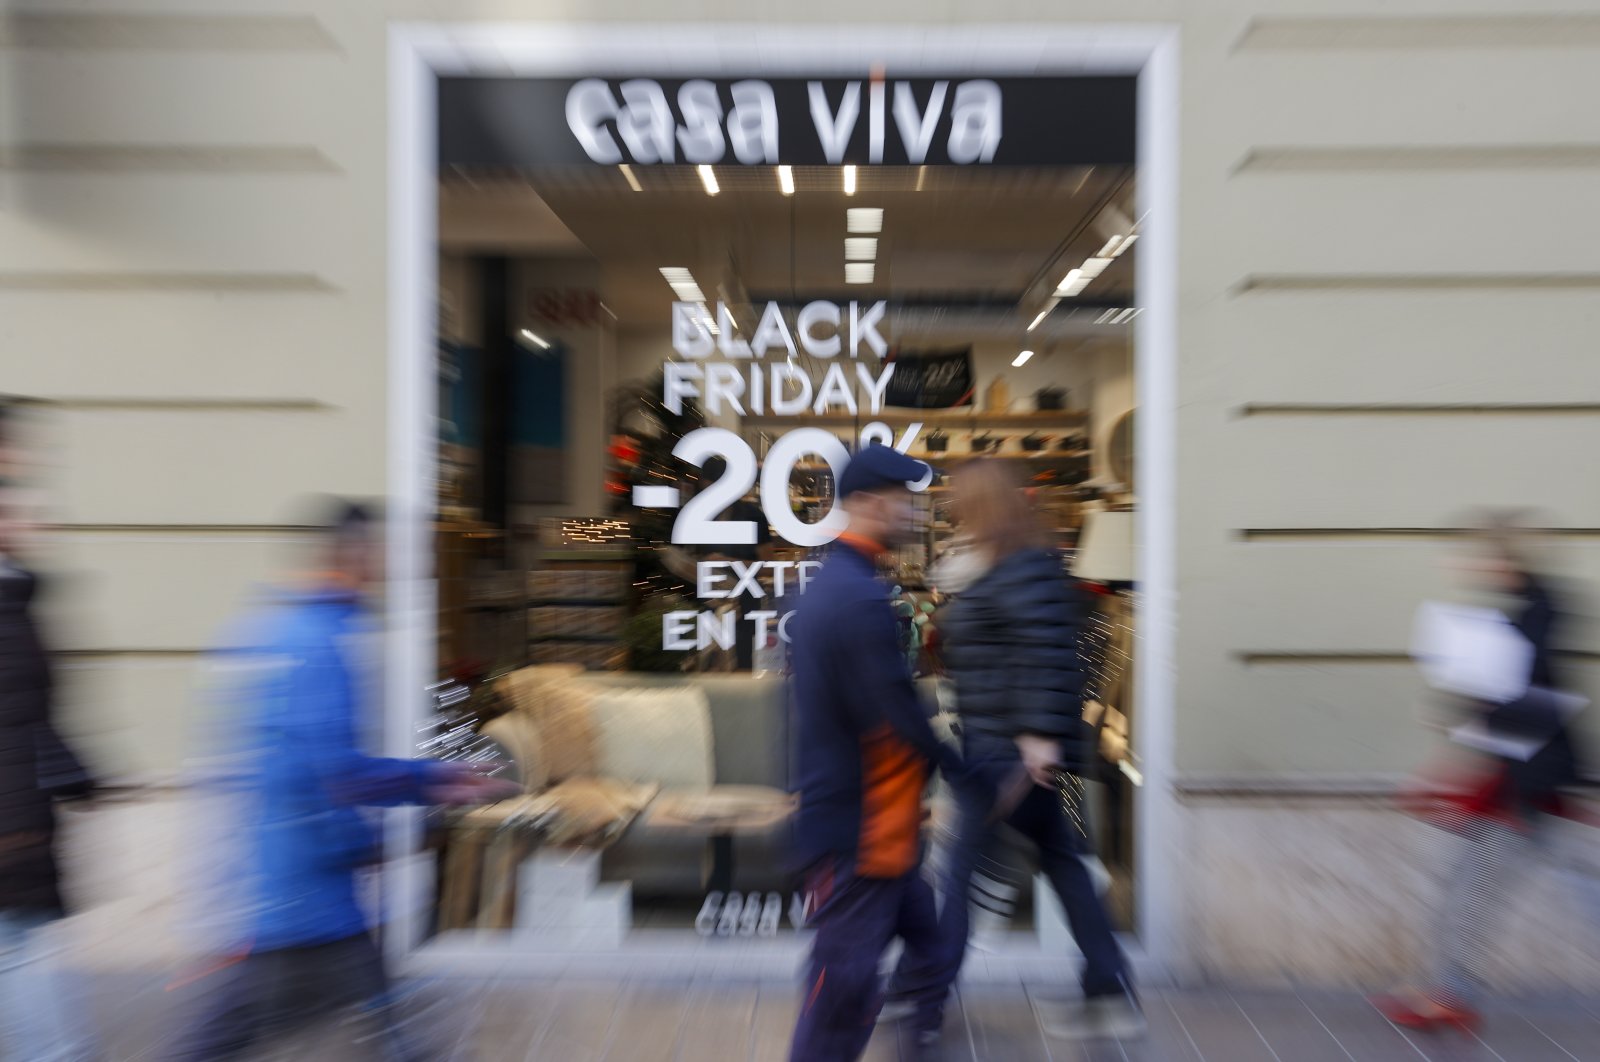 Some passers-by walk past a decor shop with a black friday sales banner in Valencia, eastern Spain, Nov.22, 2022. (EPA Photo)